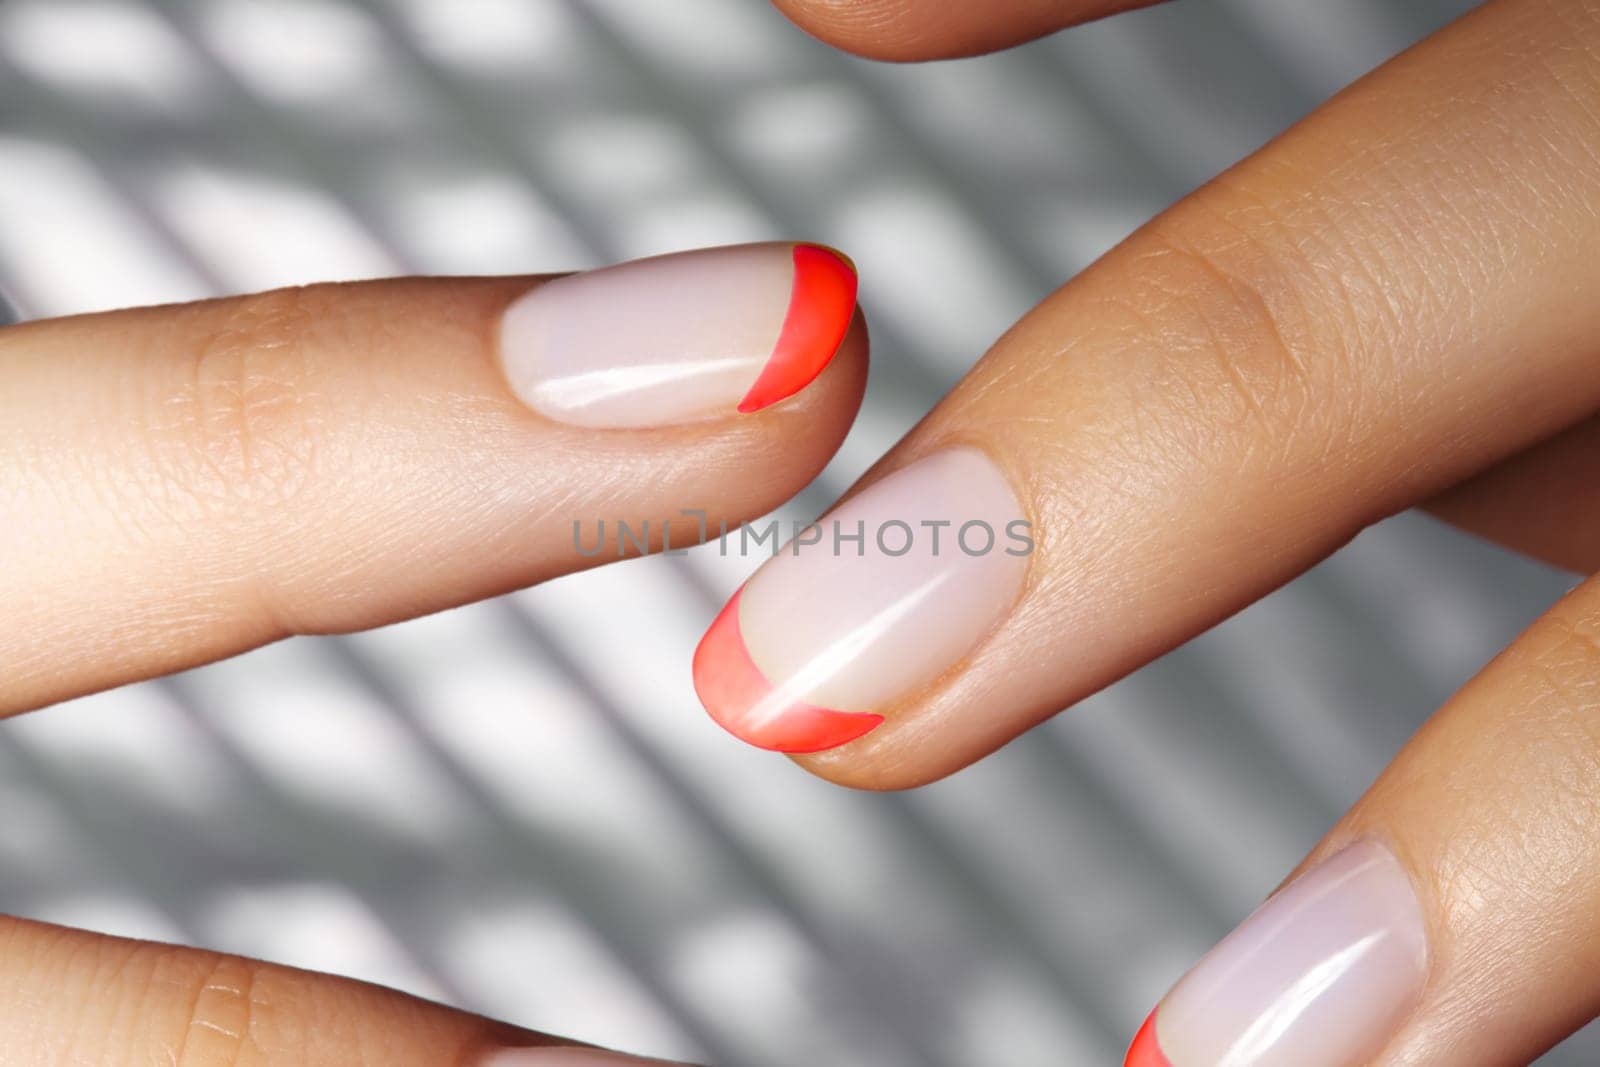 Hands with bright Red French Manicure on Geometric Background. Nails Art Design. Close-up of Female Hands with Trendy Neon Nails on Silver Striped Print Background by MarinaFrost